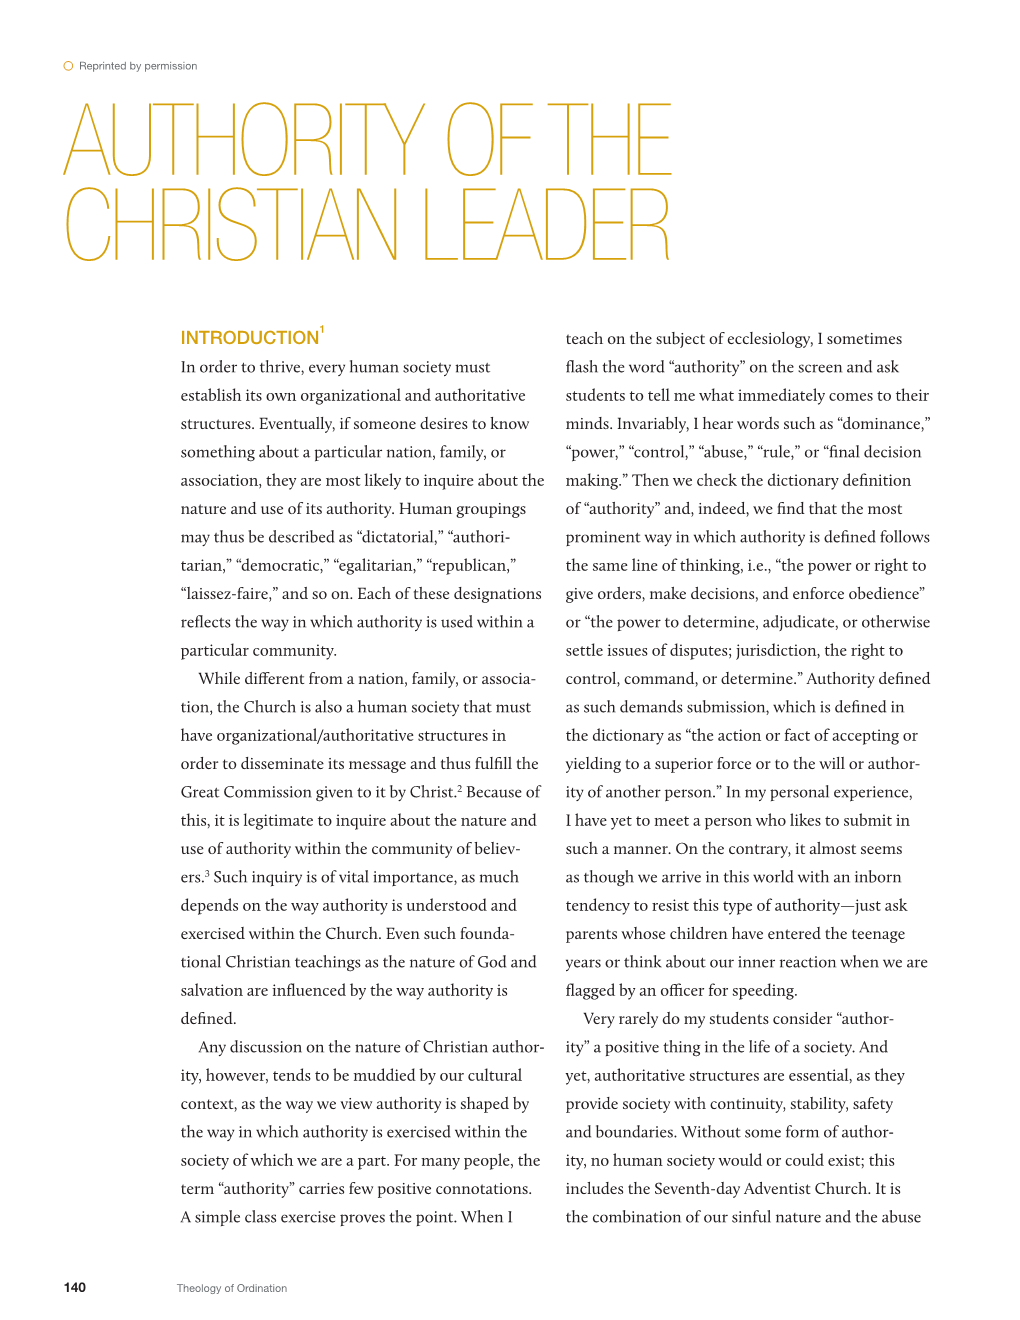 Authority of the Christian Leader